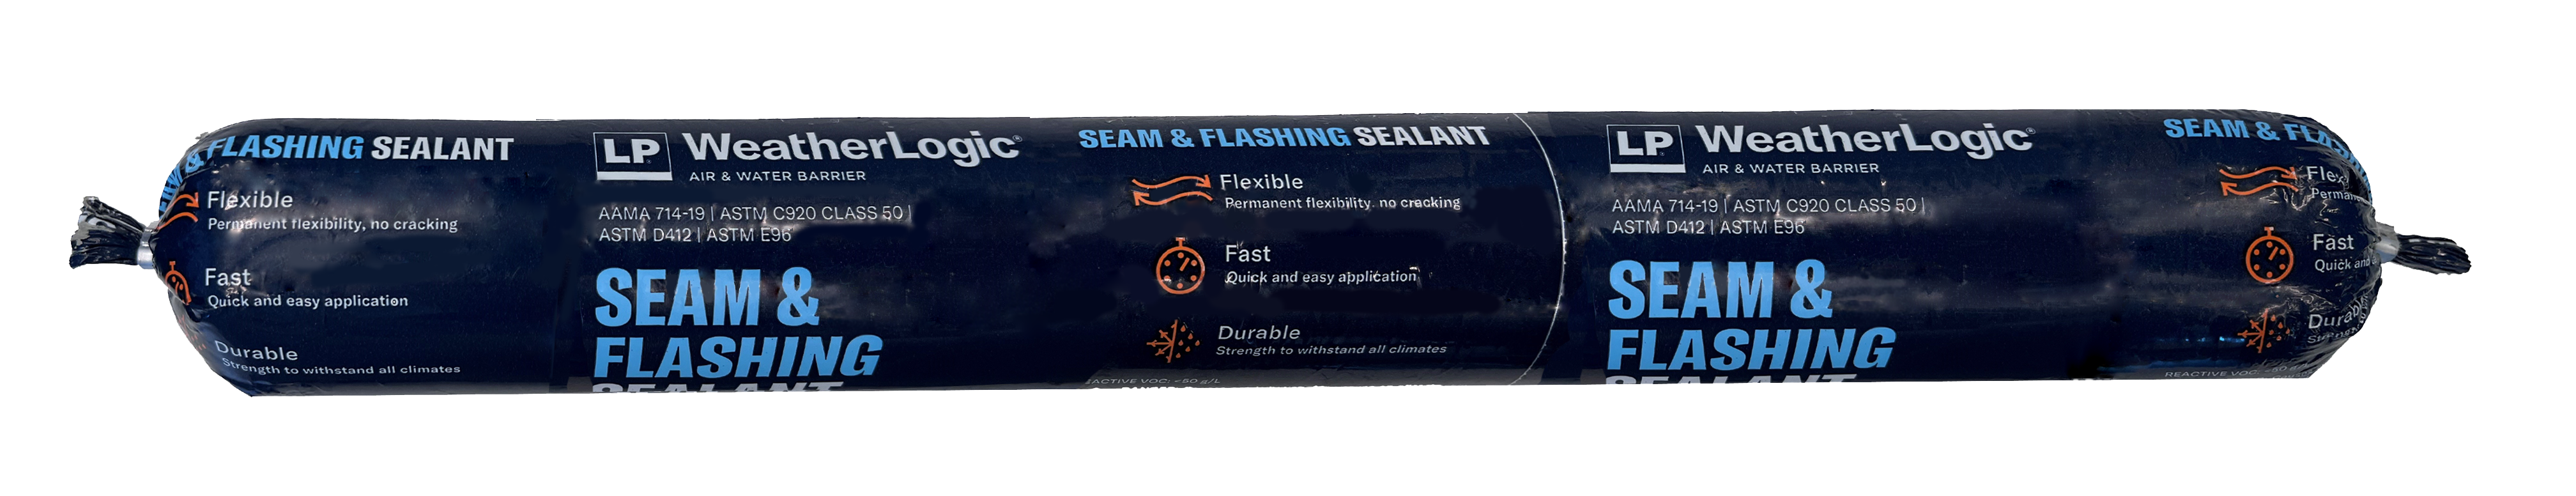 The New LP Building Solutions Seam & Flashing Sealant Has Arrived!